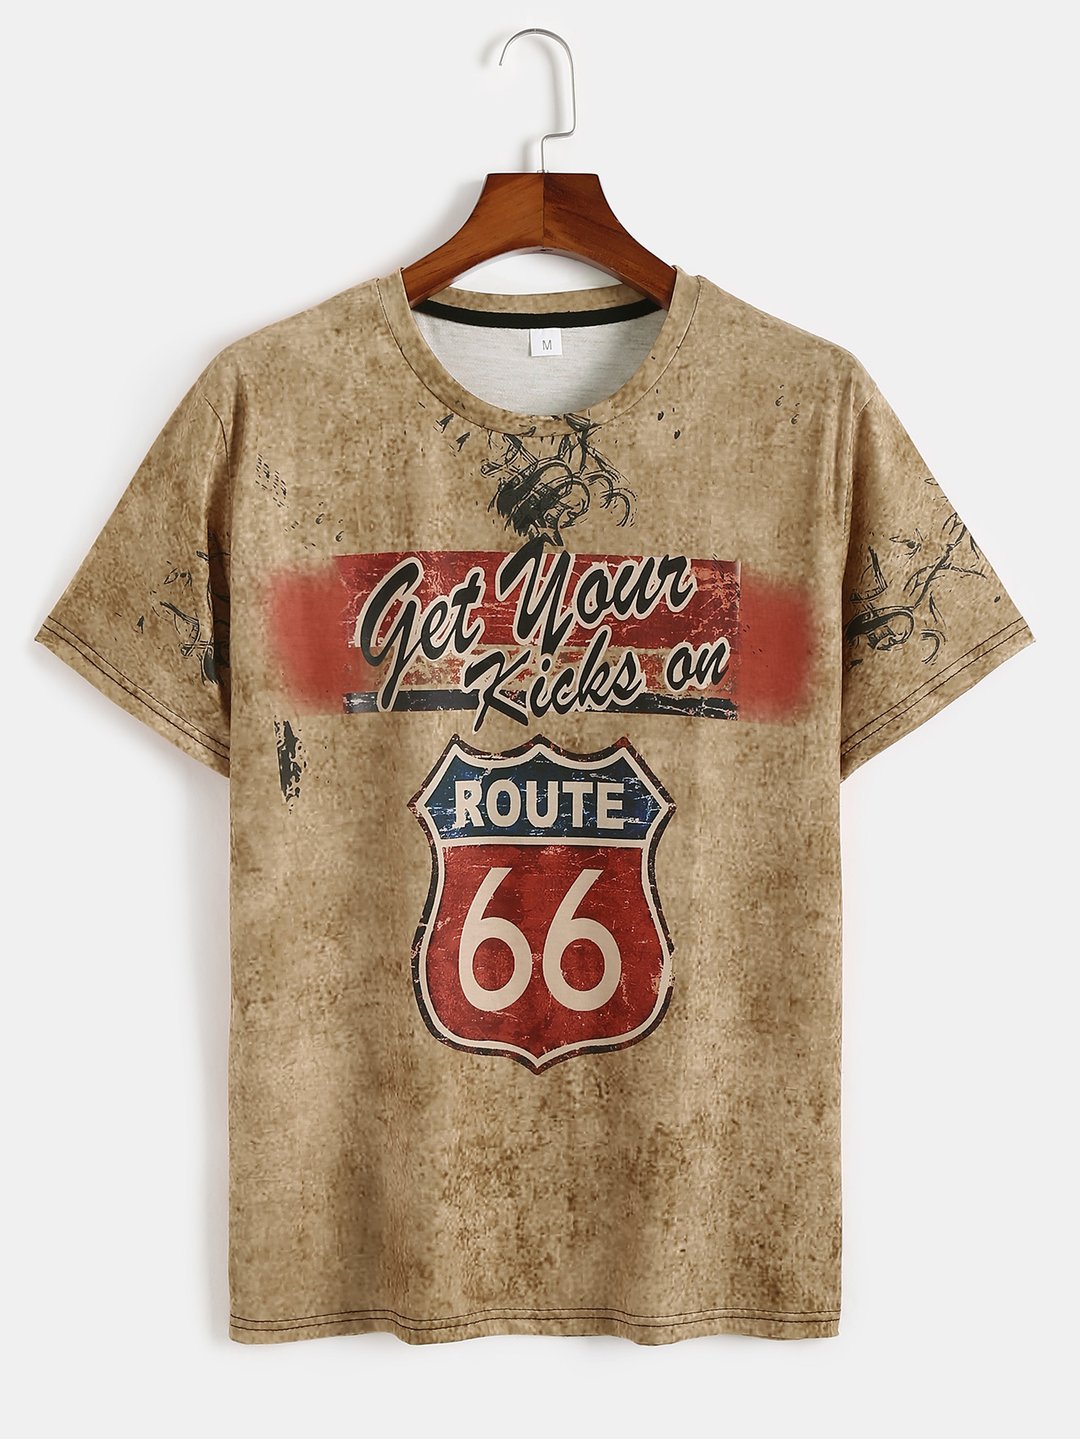 Motorcycle Print T-shirt Route 66 - DUVAL